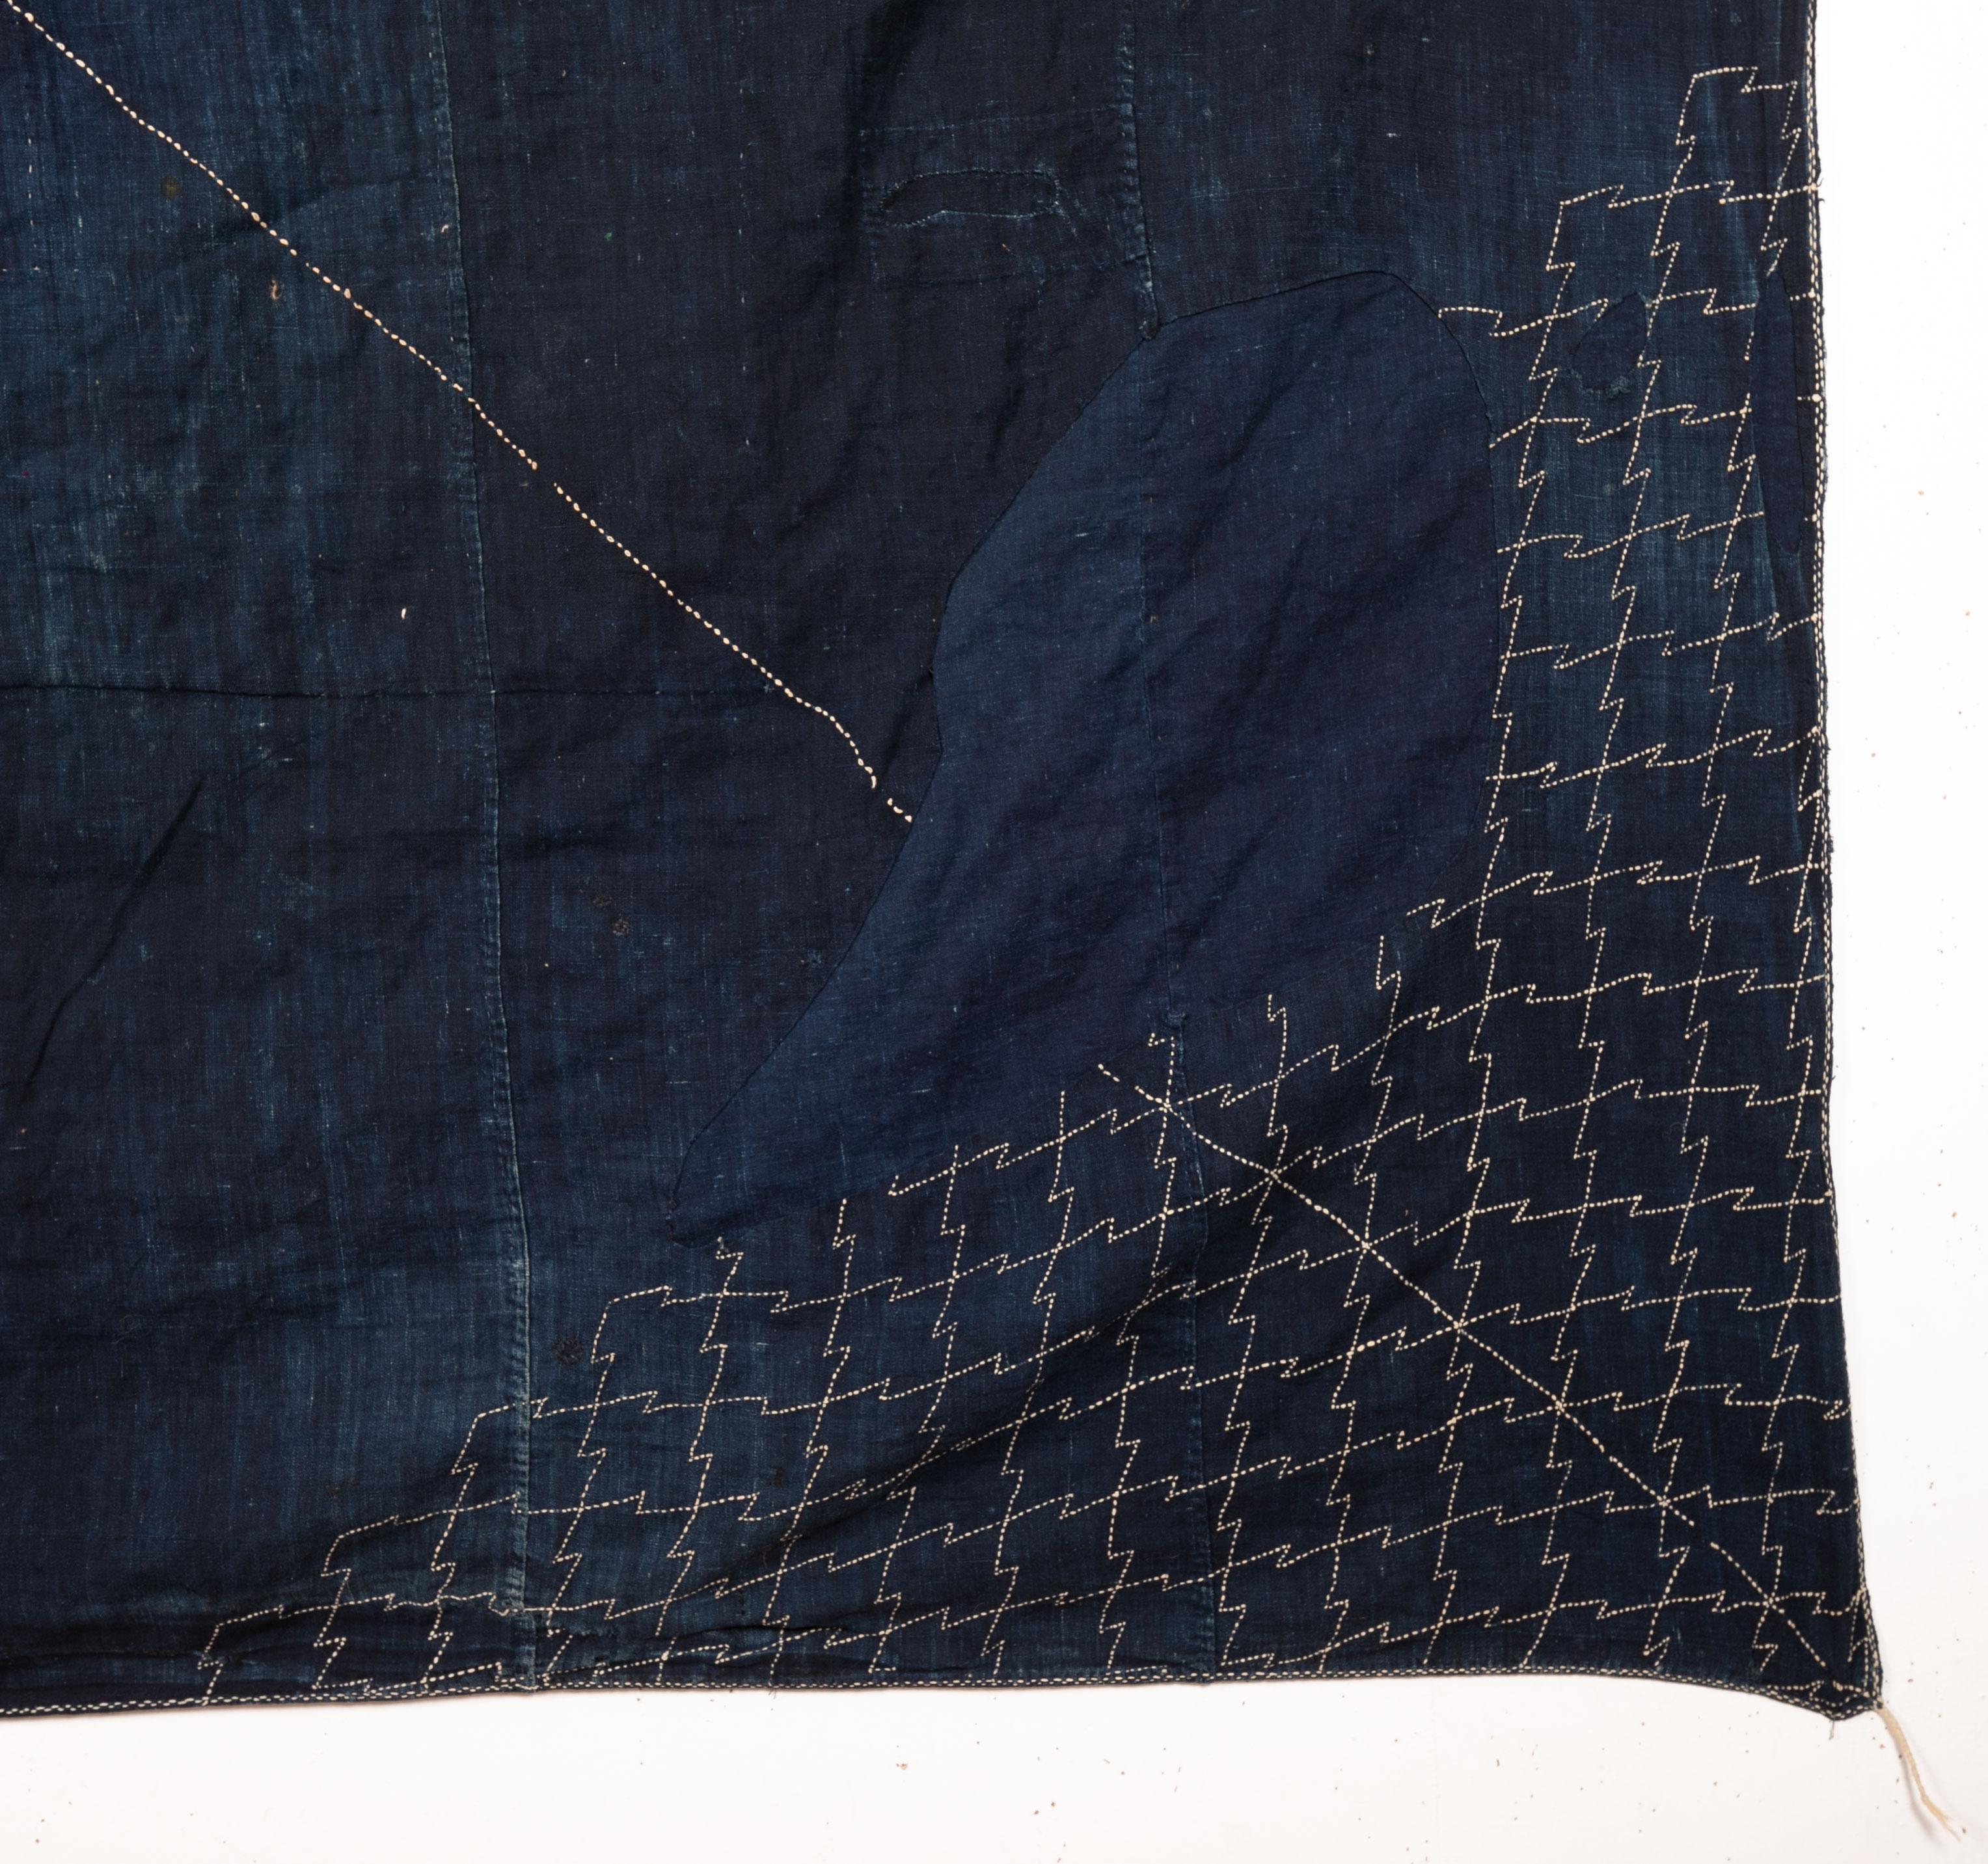 Hand-Woven Indigo Froshiki 'Wrapping' from Japan, Early 20th Century